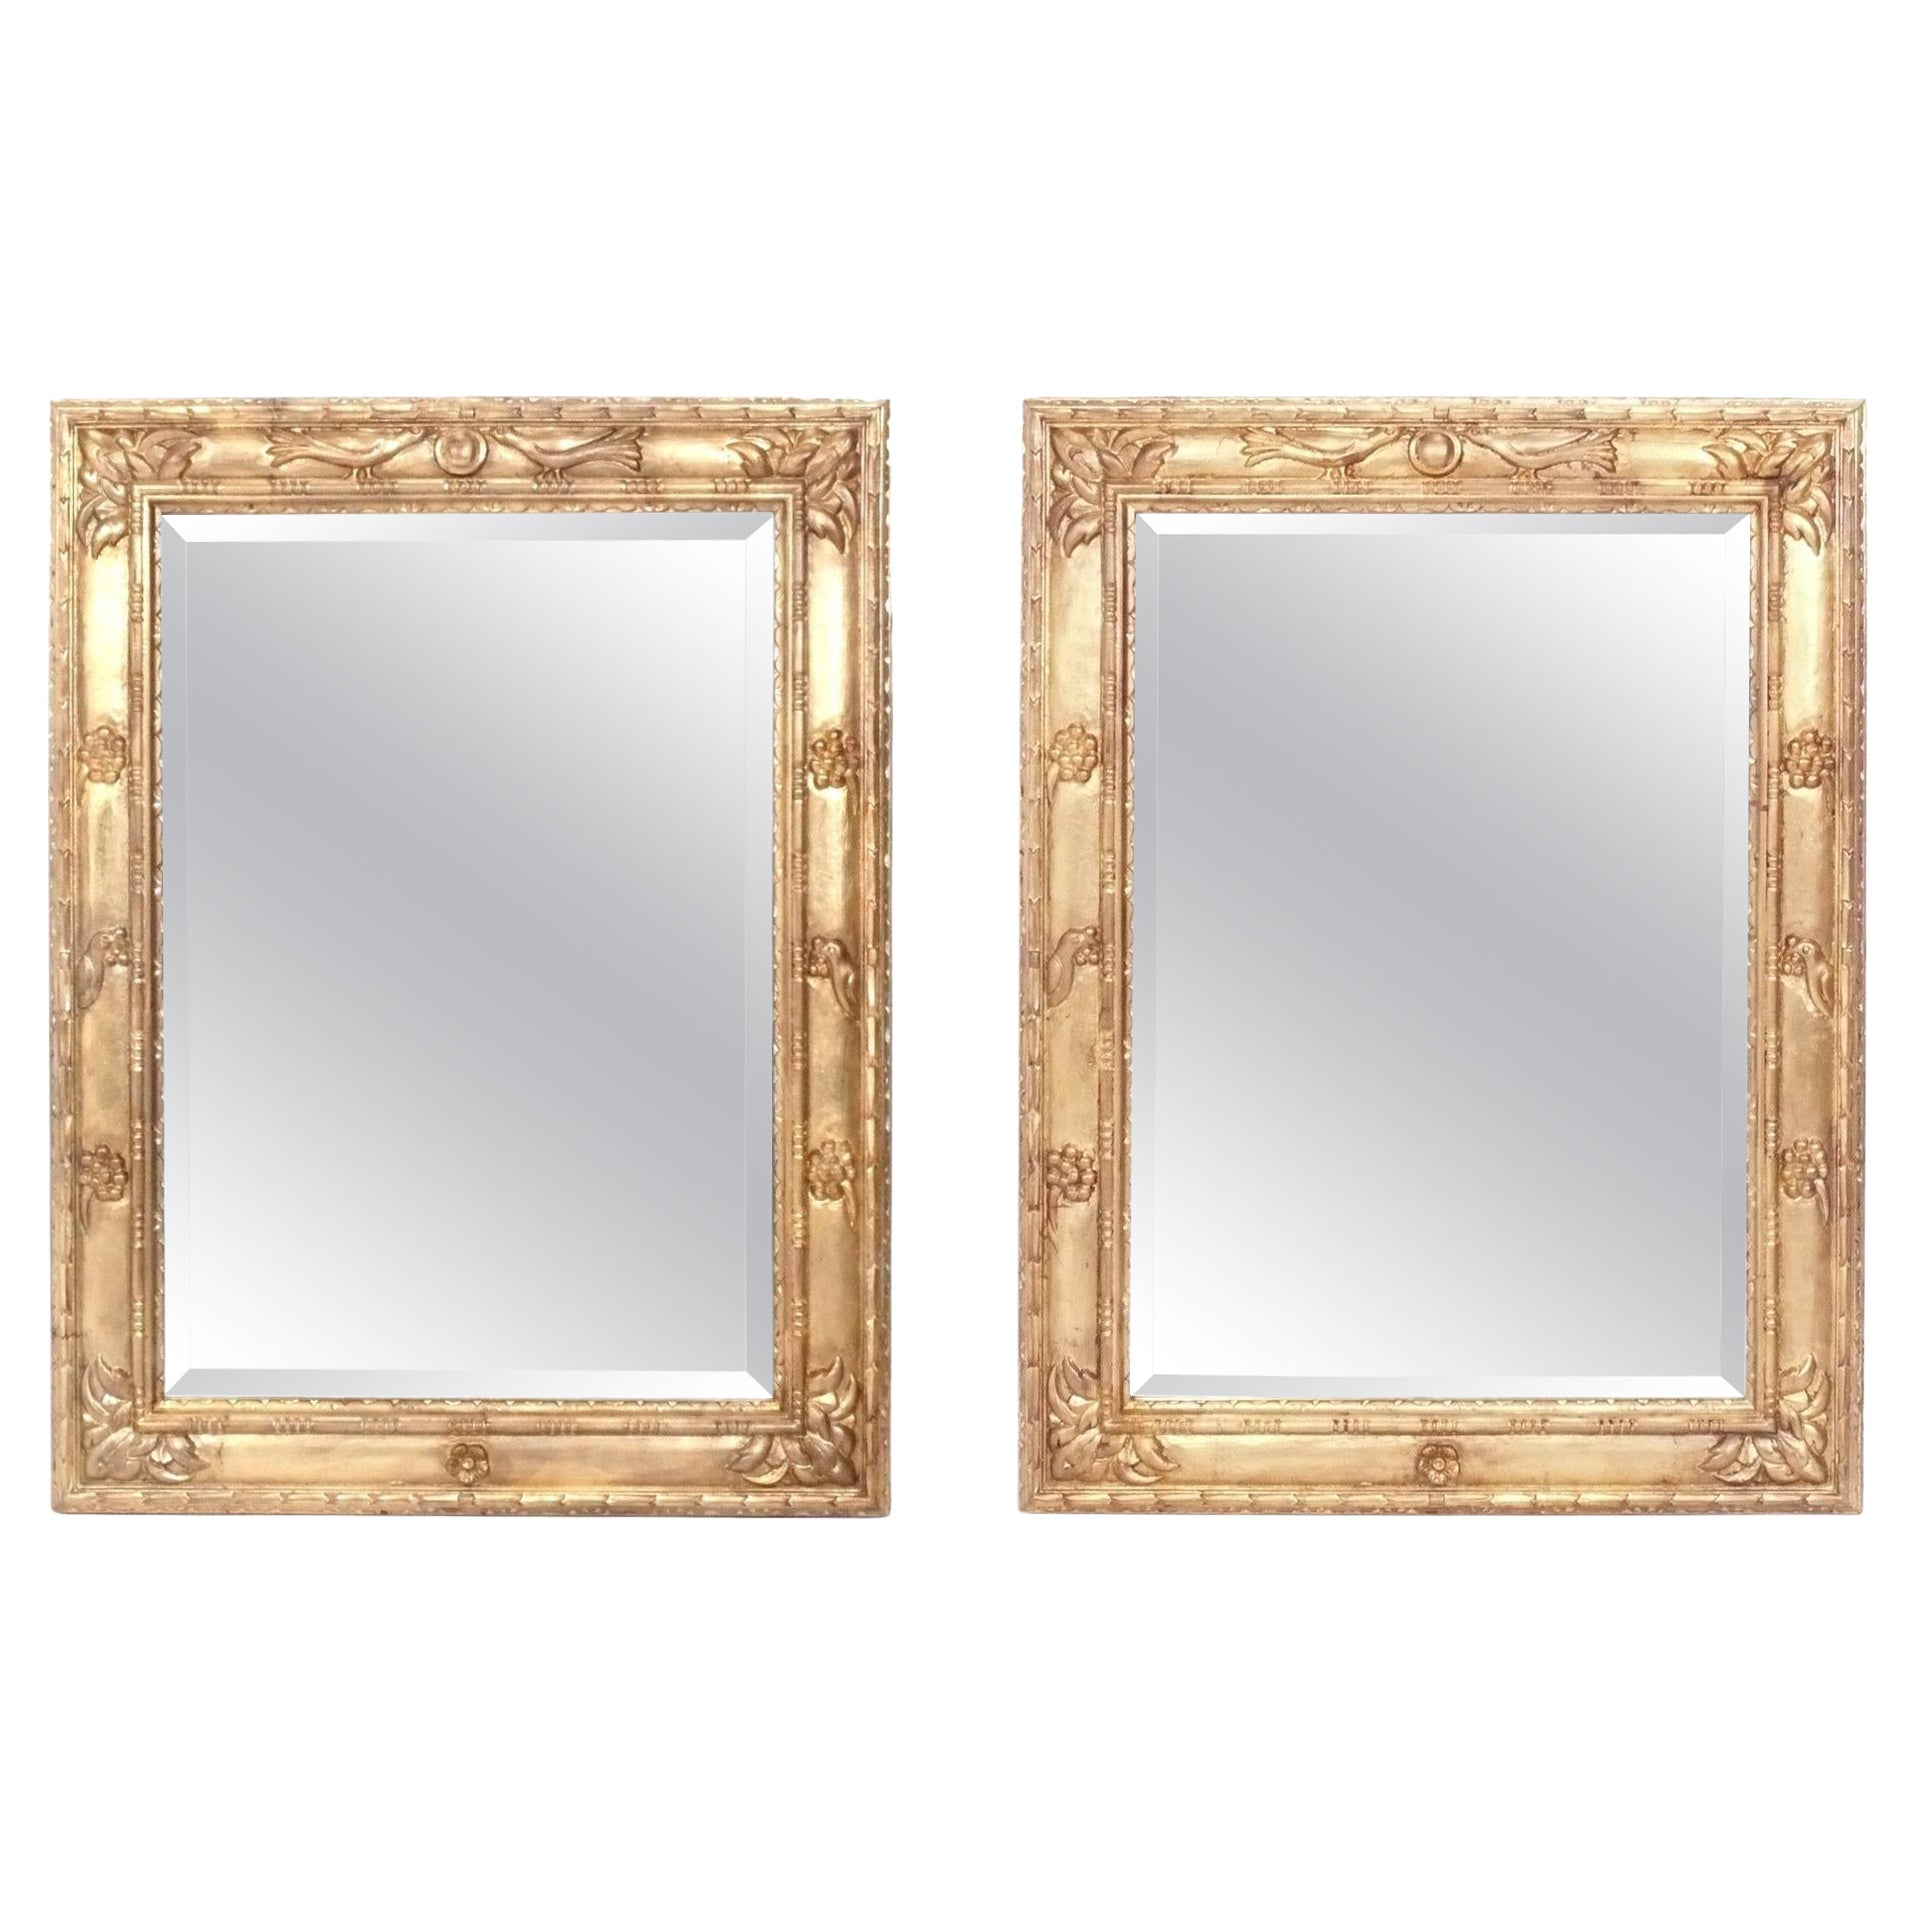 Pair of Large Scale Gilt Mirrors with Dove Design